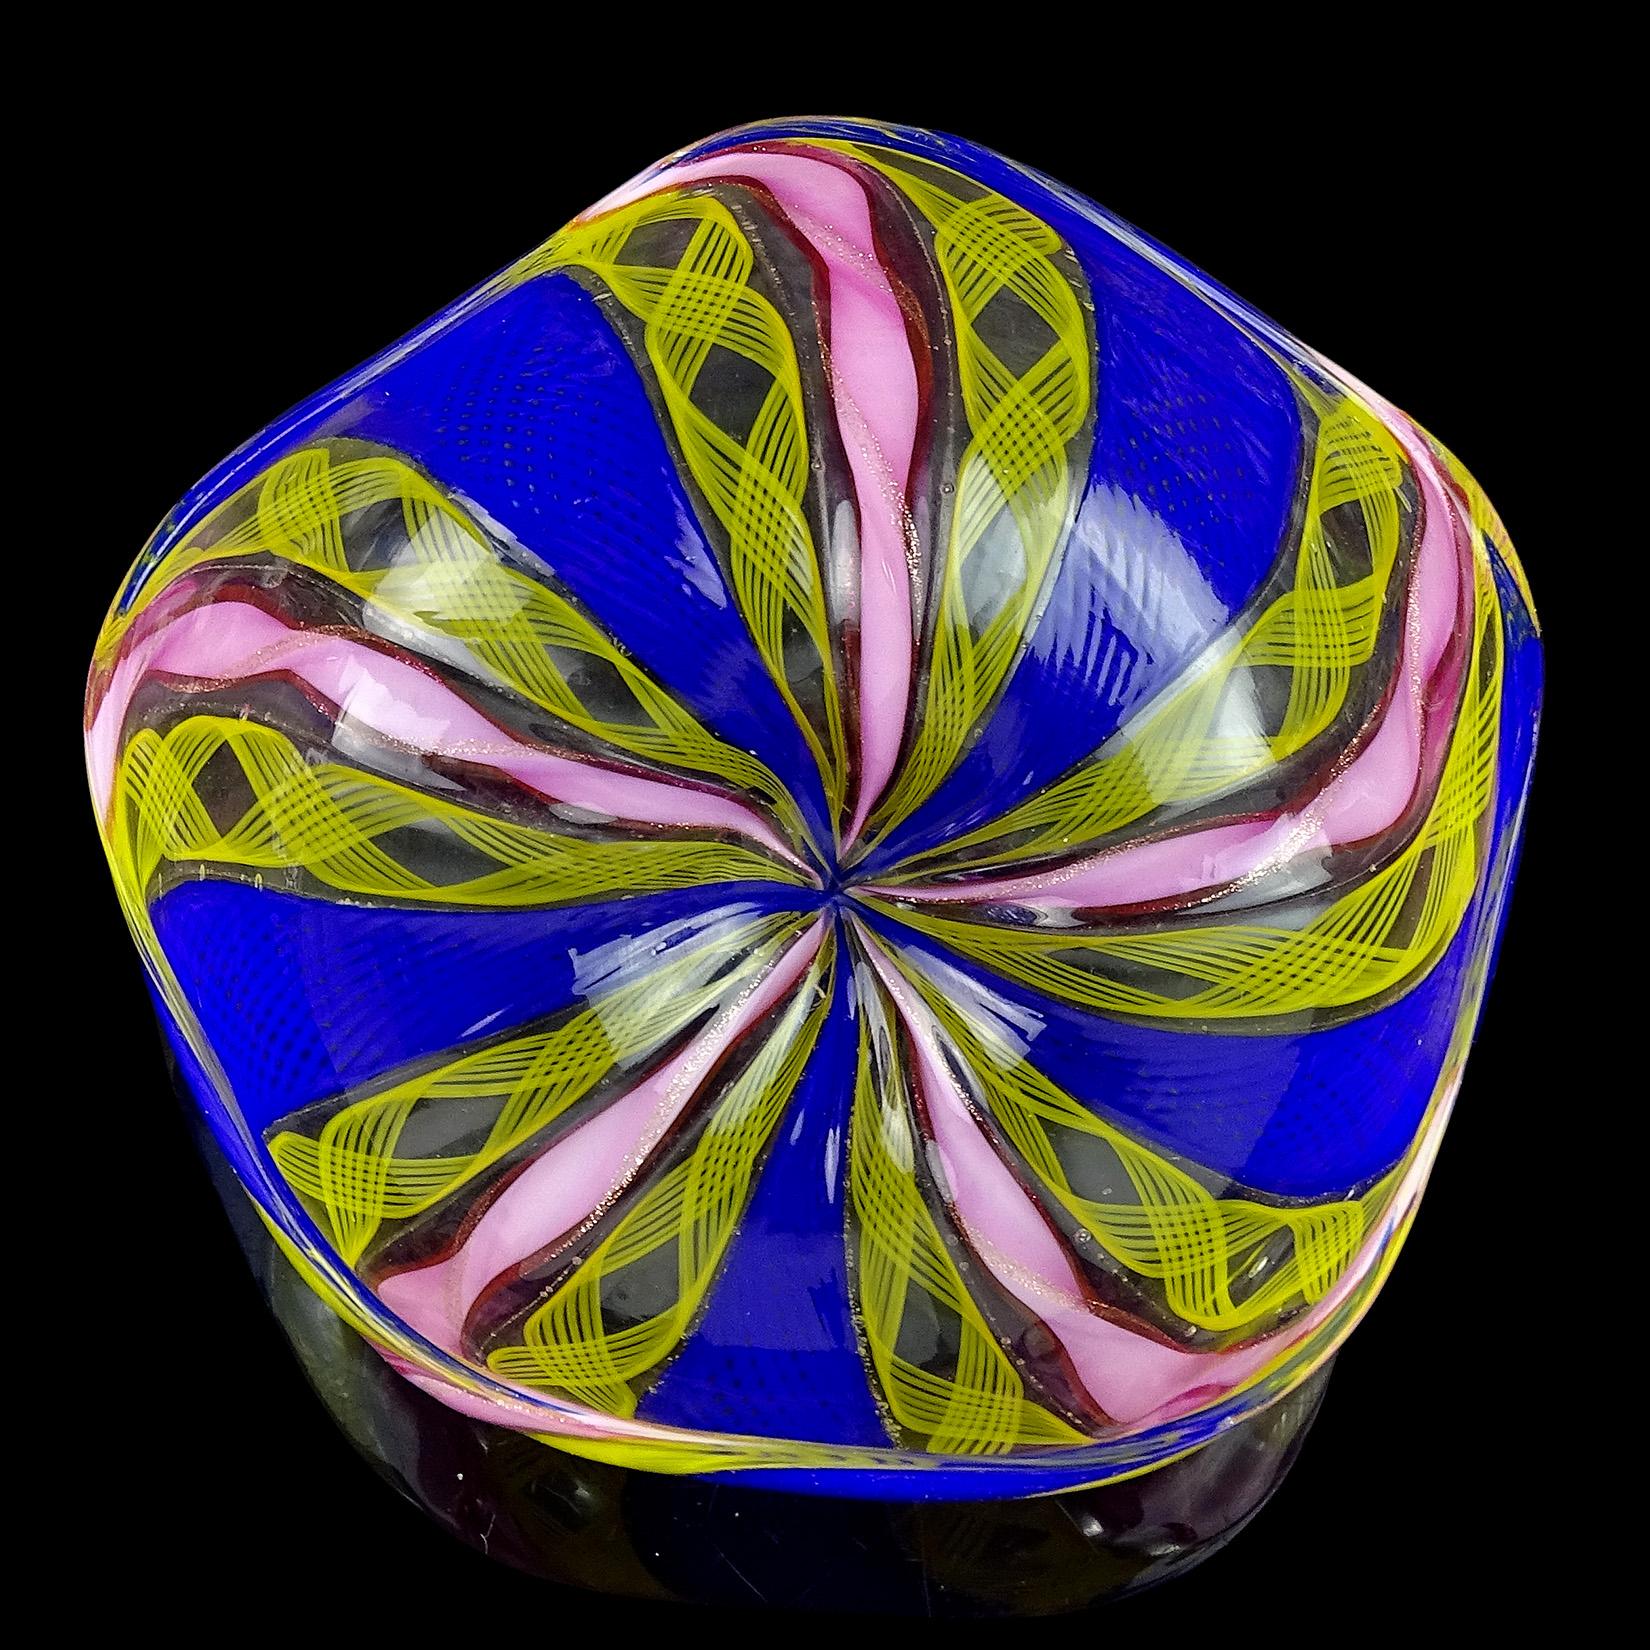 Beautiful vintage Murano hand blown cobalt blue, bright yellow and pink ribbons Italian art glass sand dollar / star shaped trinket dish. Created in the manner of the Fratelli Toso and Salviati companies. The pink ribbons have a twisting copper